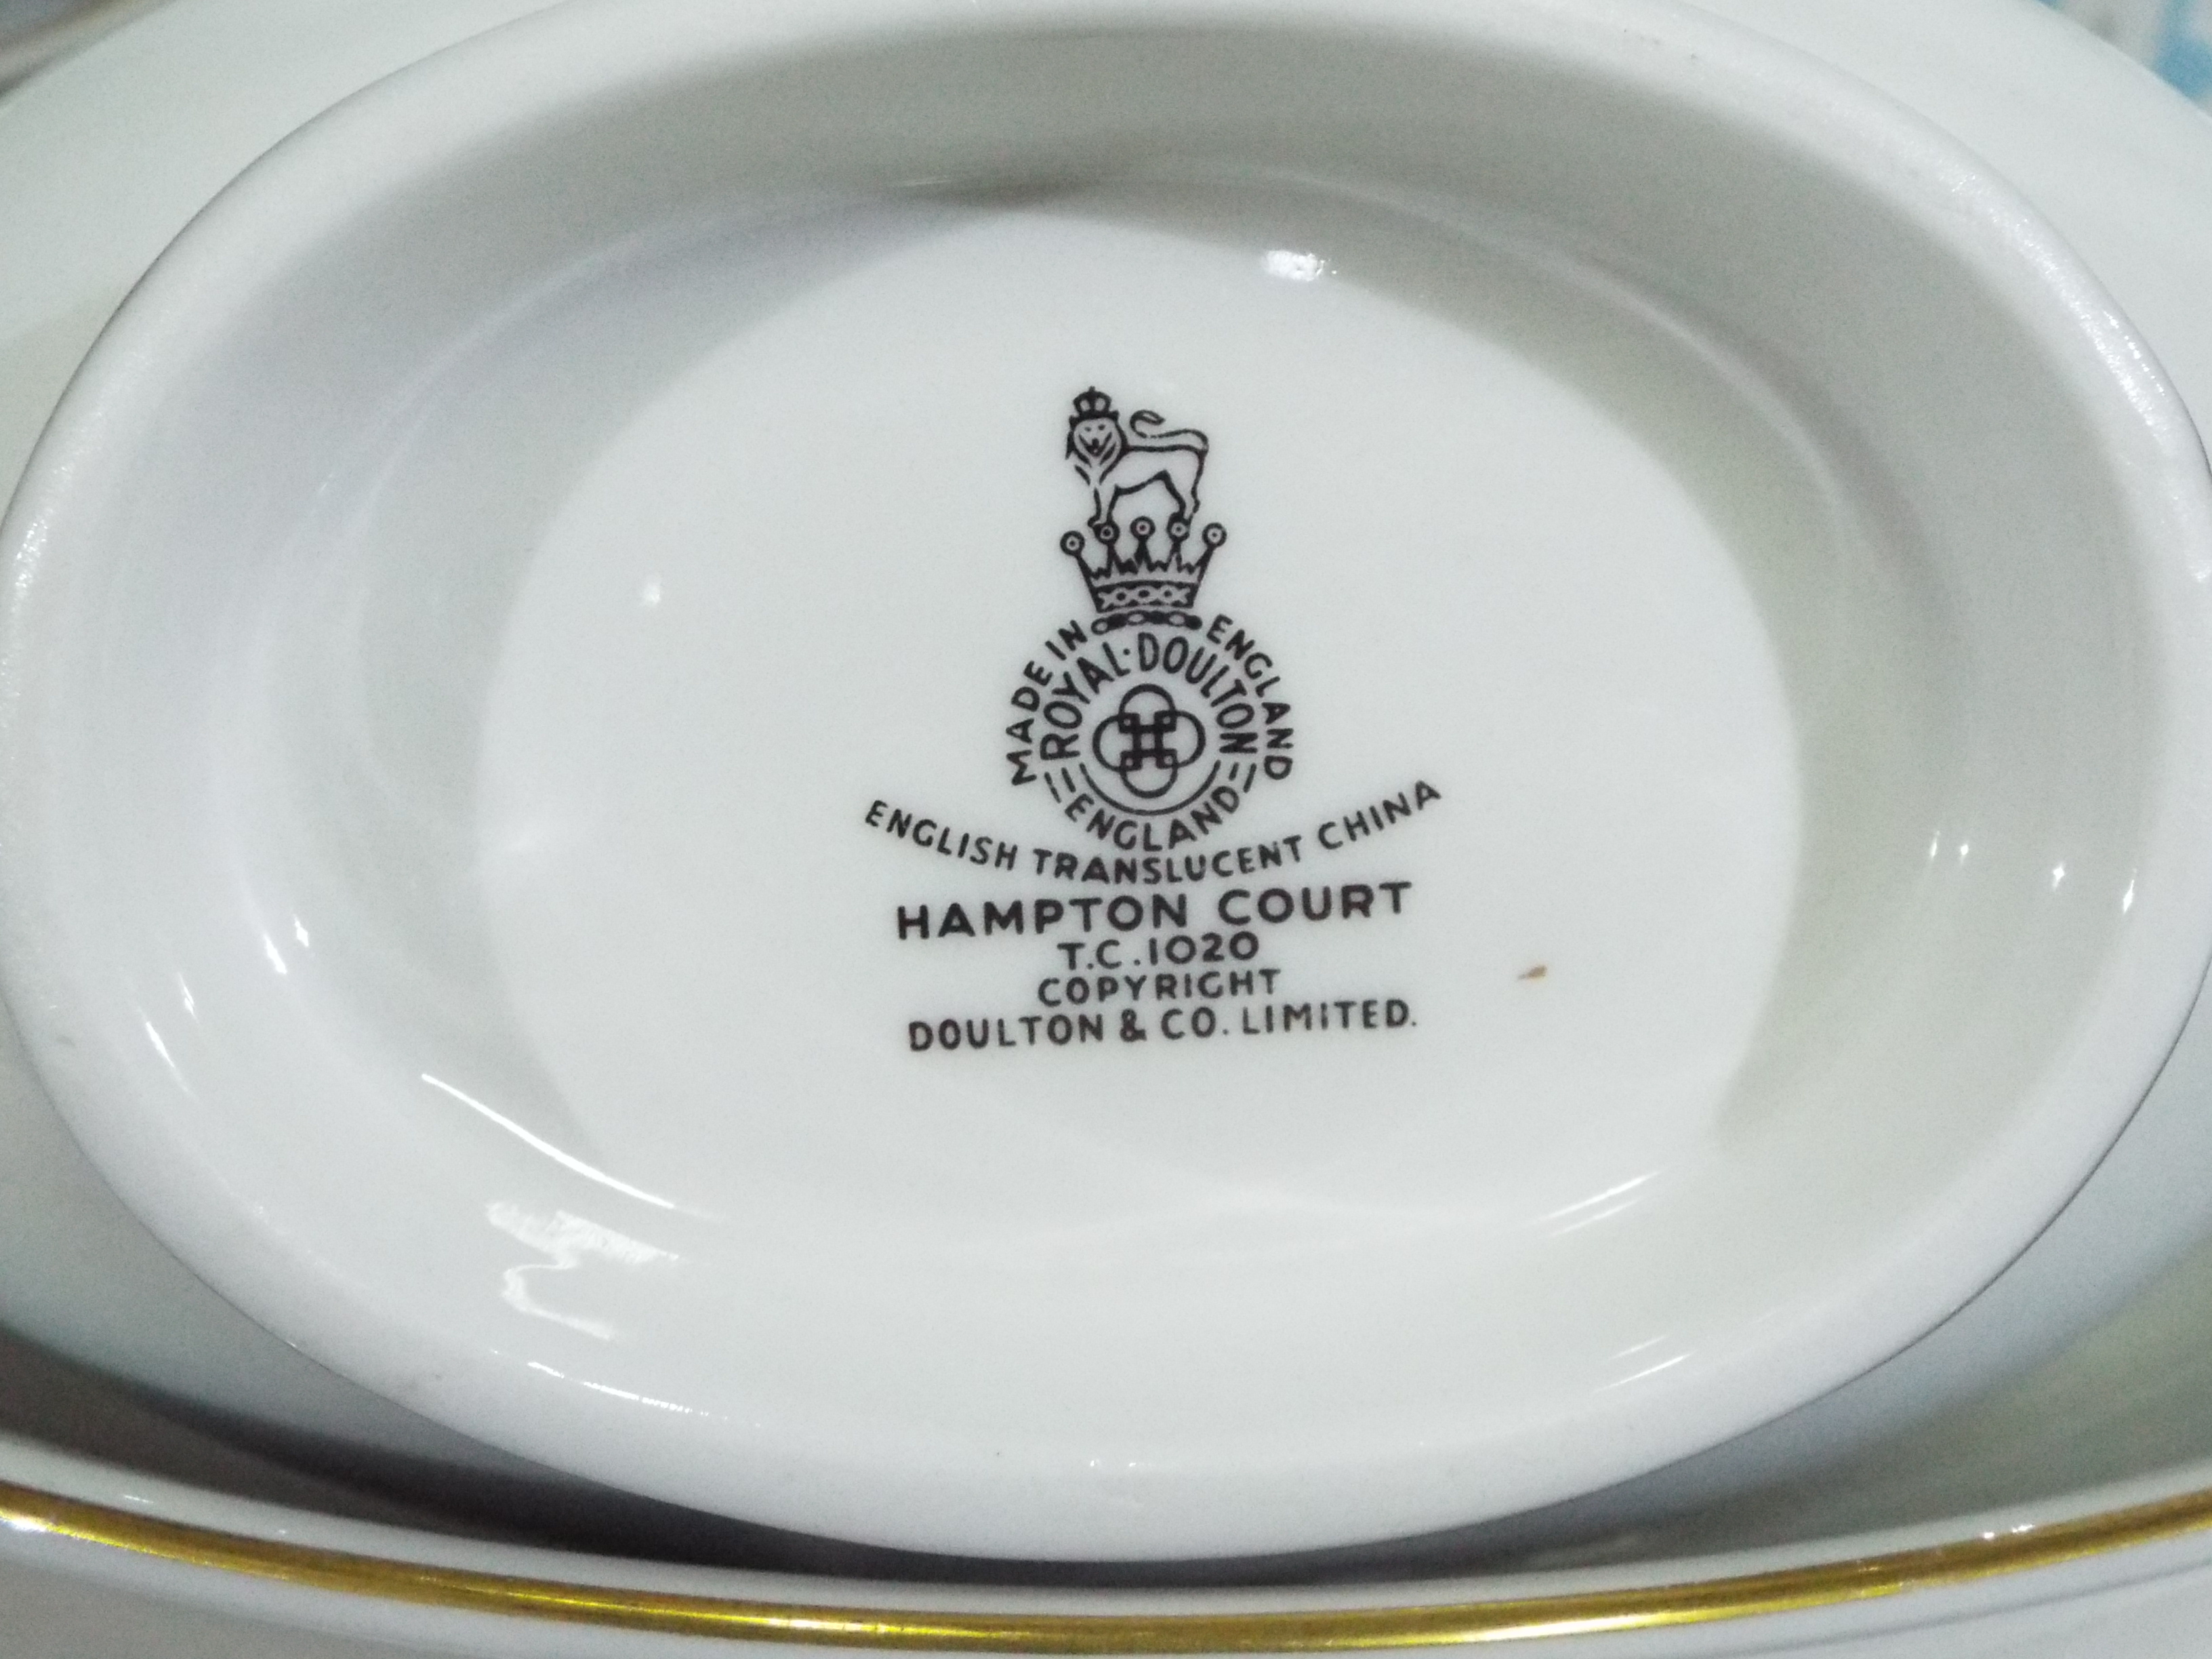 A quantity of Royal Doulton dinner and tea wares in the Hampton Court pattern, - Image 9 of 9